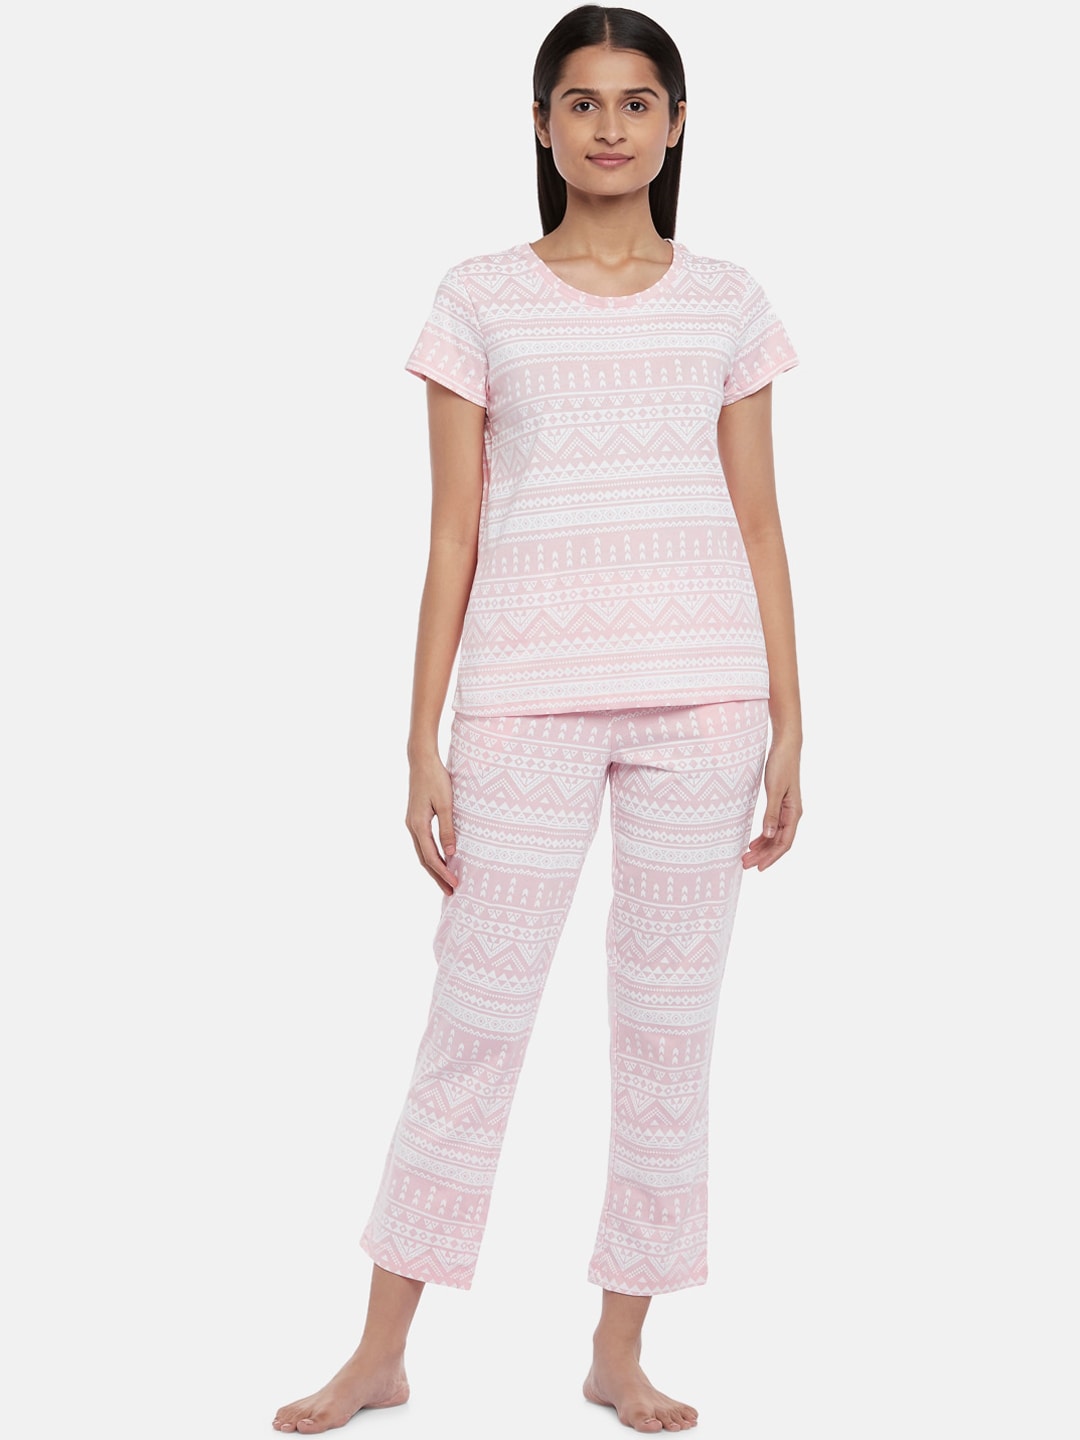 Dreamz by Pantaloons Women Pink & White Printed Night suit Price in India